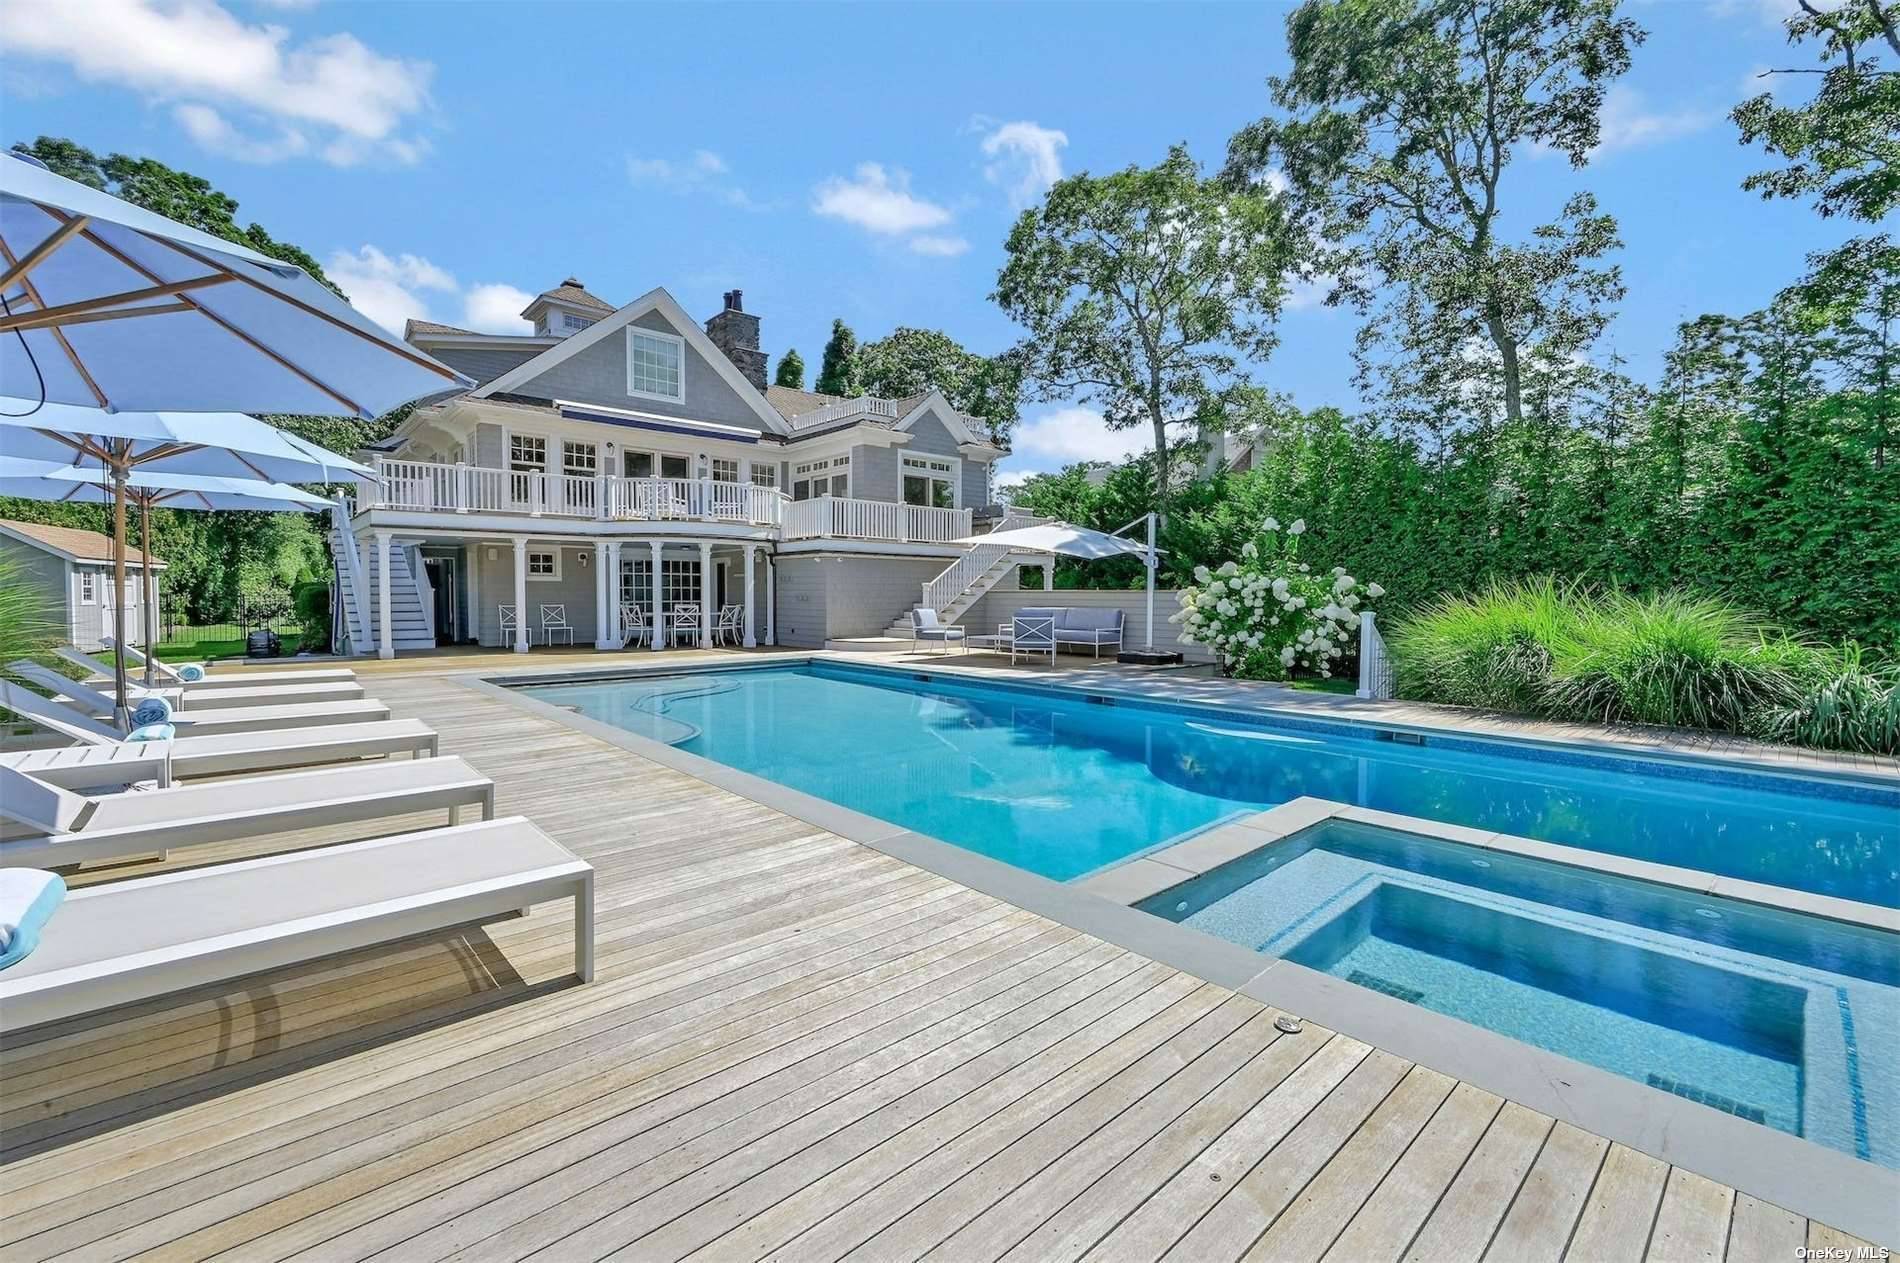 This custom built Nantucket style home is nestled at the end of a long gated driveway, offering unparalleled privacy and captivating western views over Quantuck Creek.